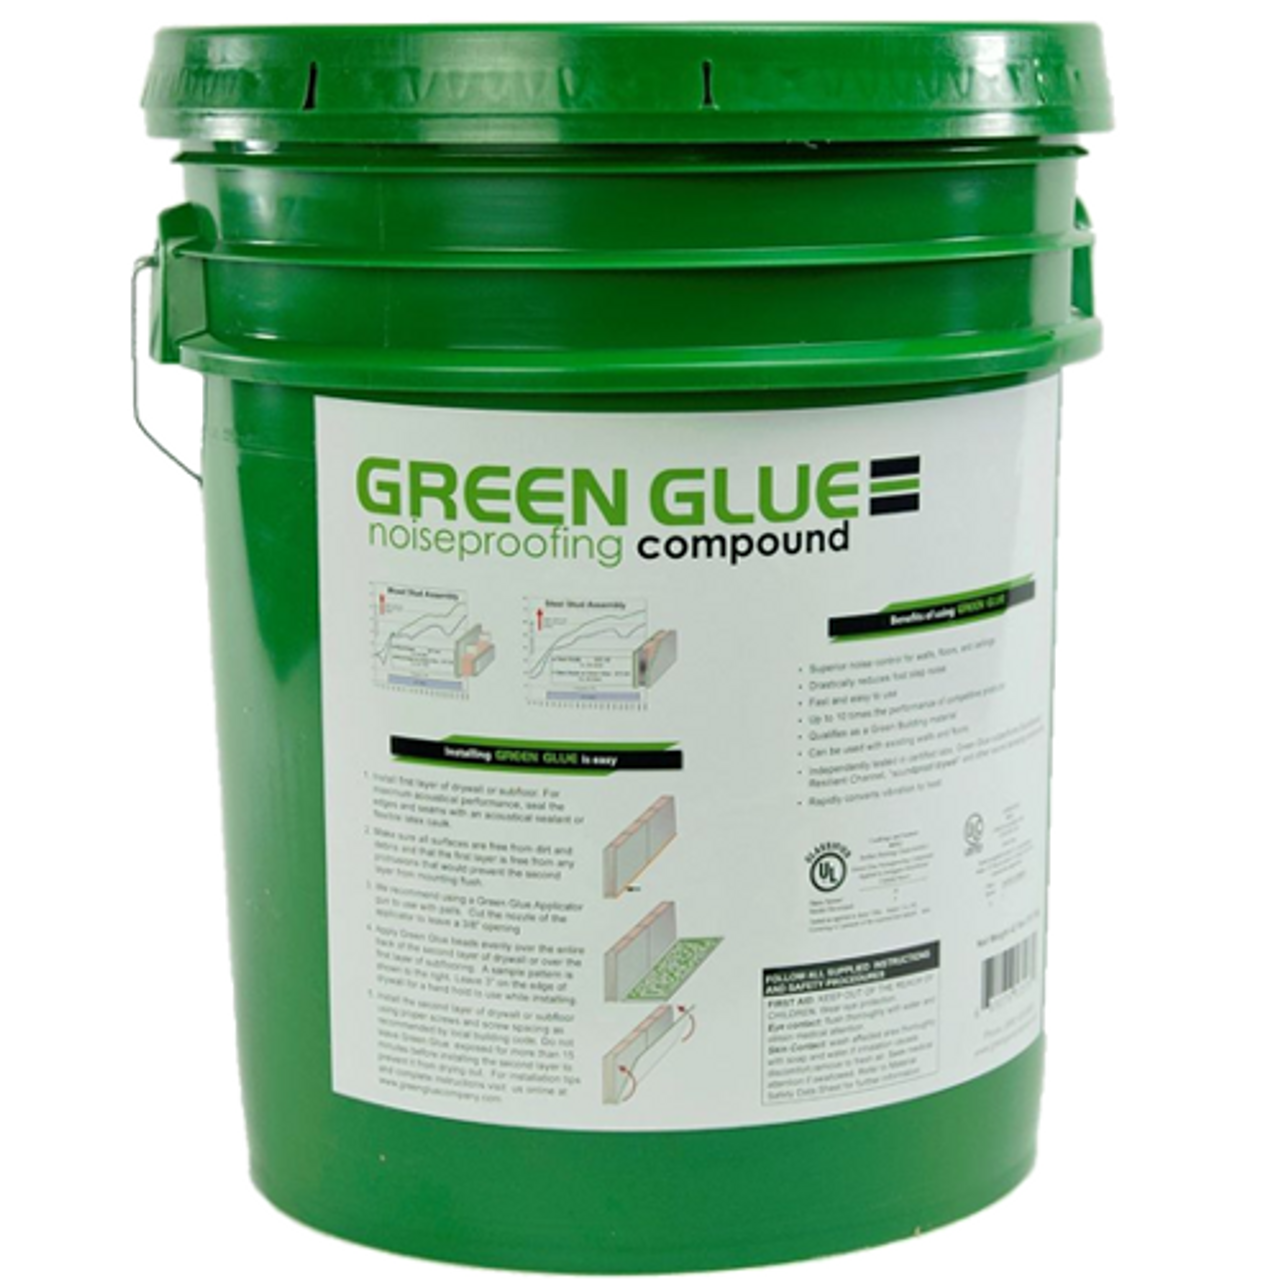 Green Glue Noiseproofing Compound, 5-Gallon Bucket with 2 Acoustic Caulk  Sealant Tubes of 29 oz - for Noise Dampening and Soundproofing.